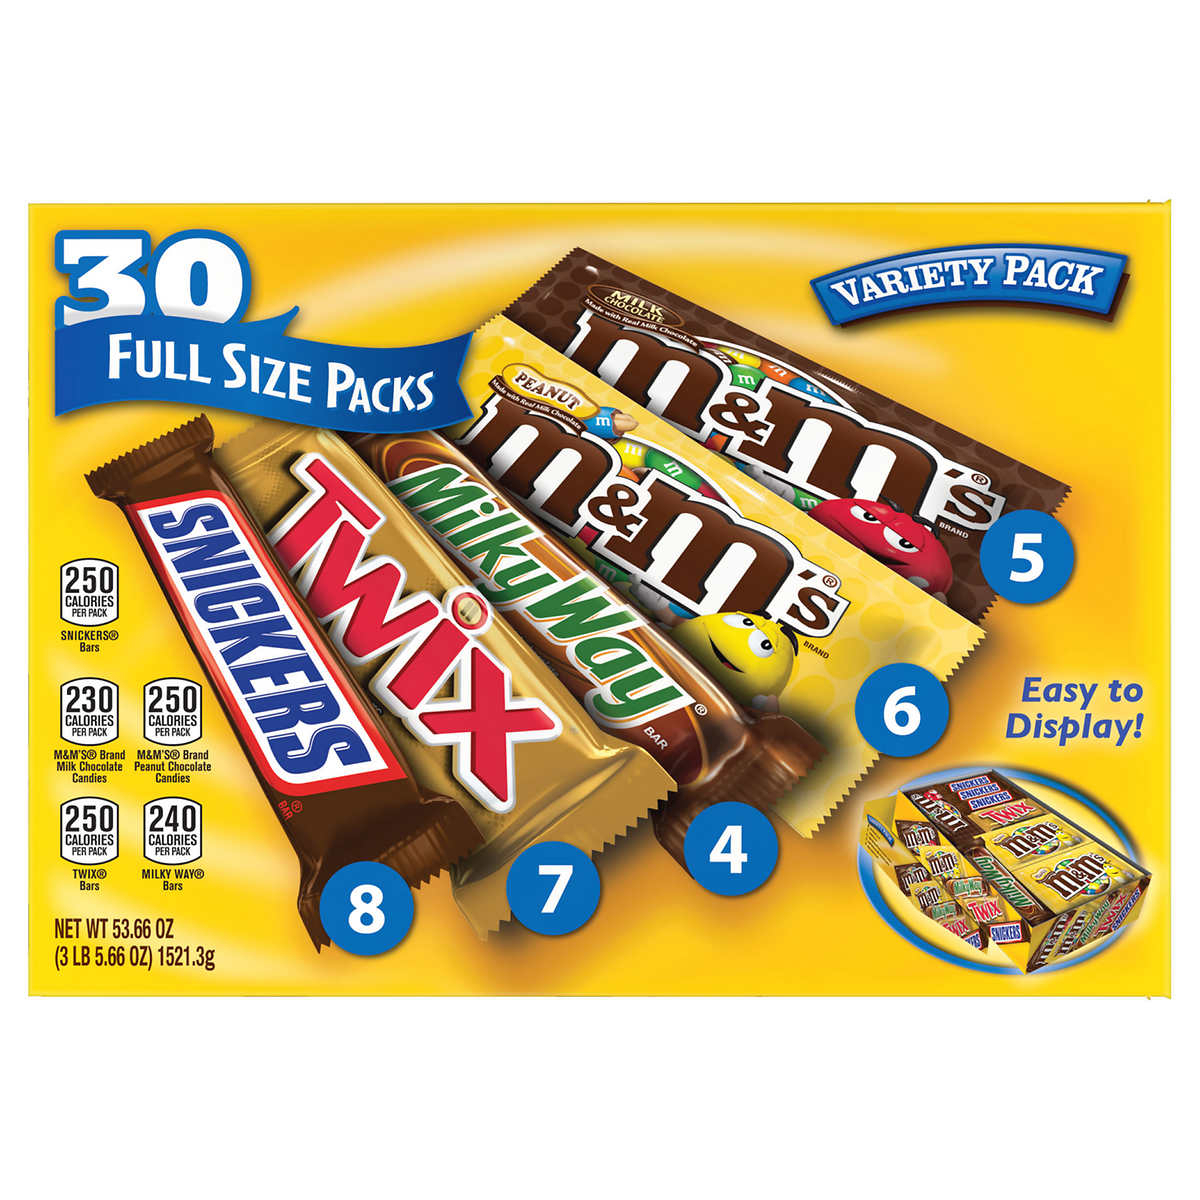 Mars Candy Variety Pack, 30 Count, 53.66 Oz Total